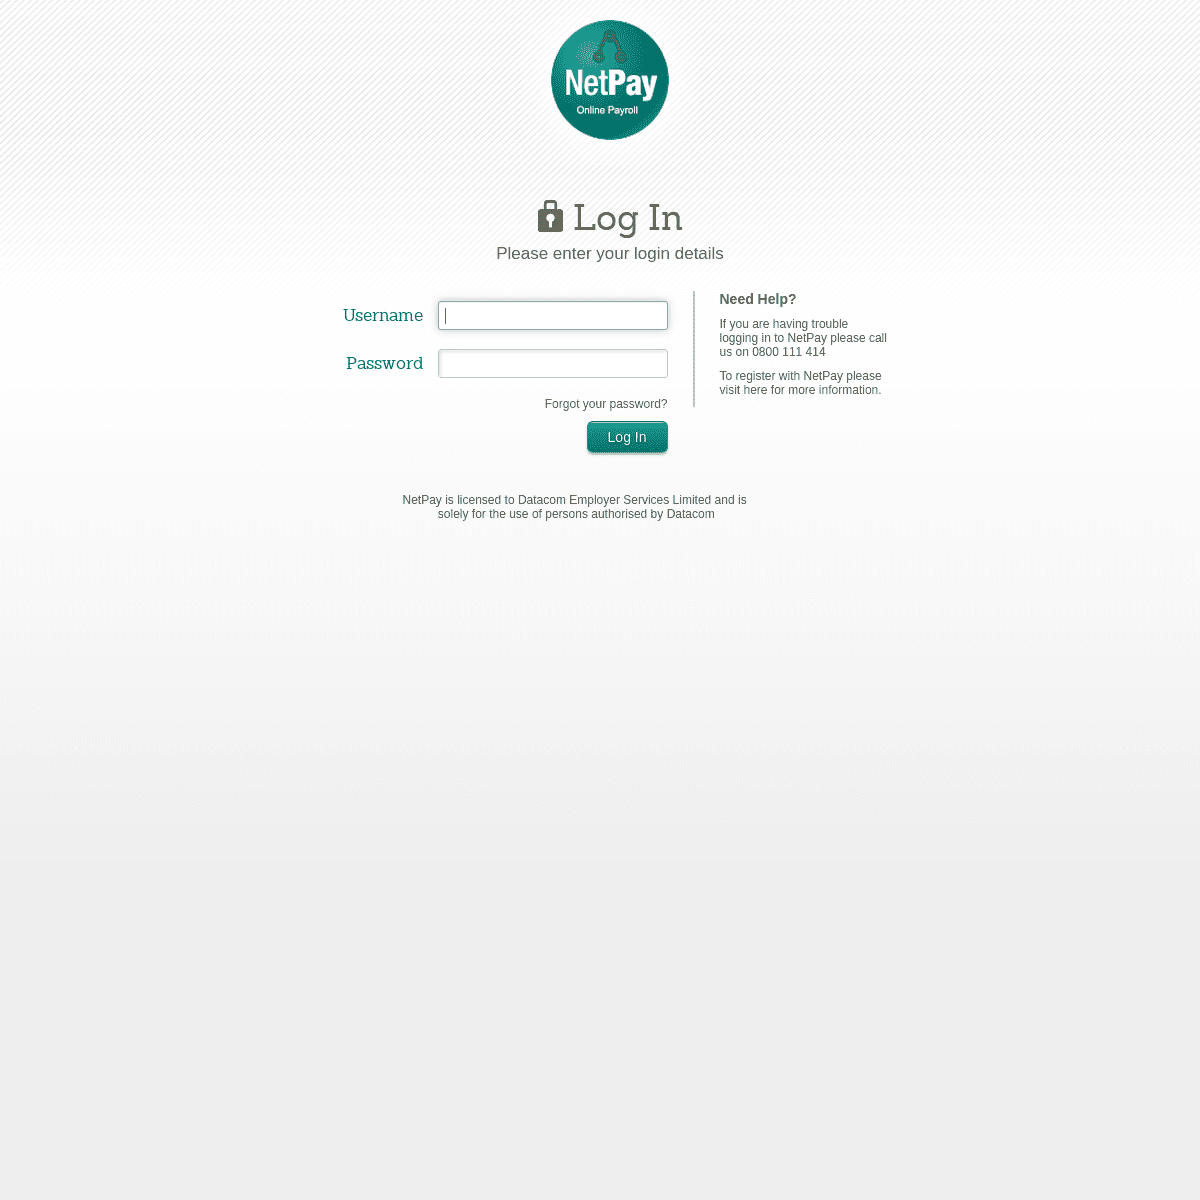 A complete backup of nettpay.co.nz